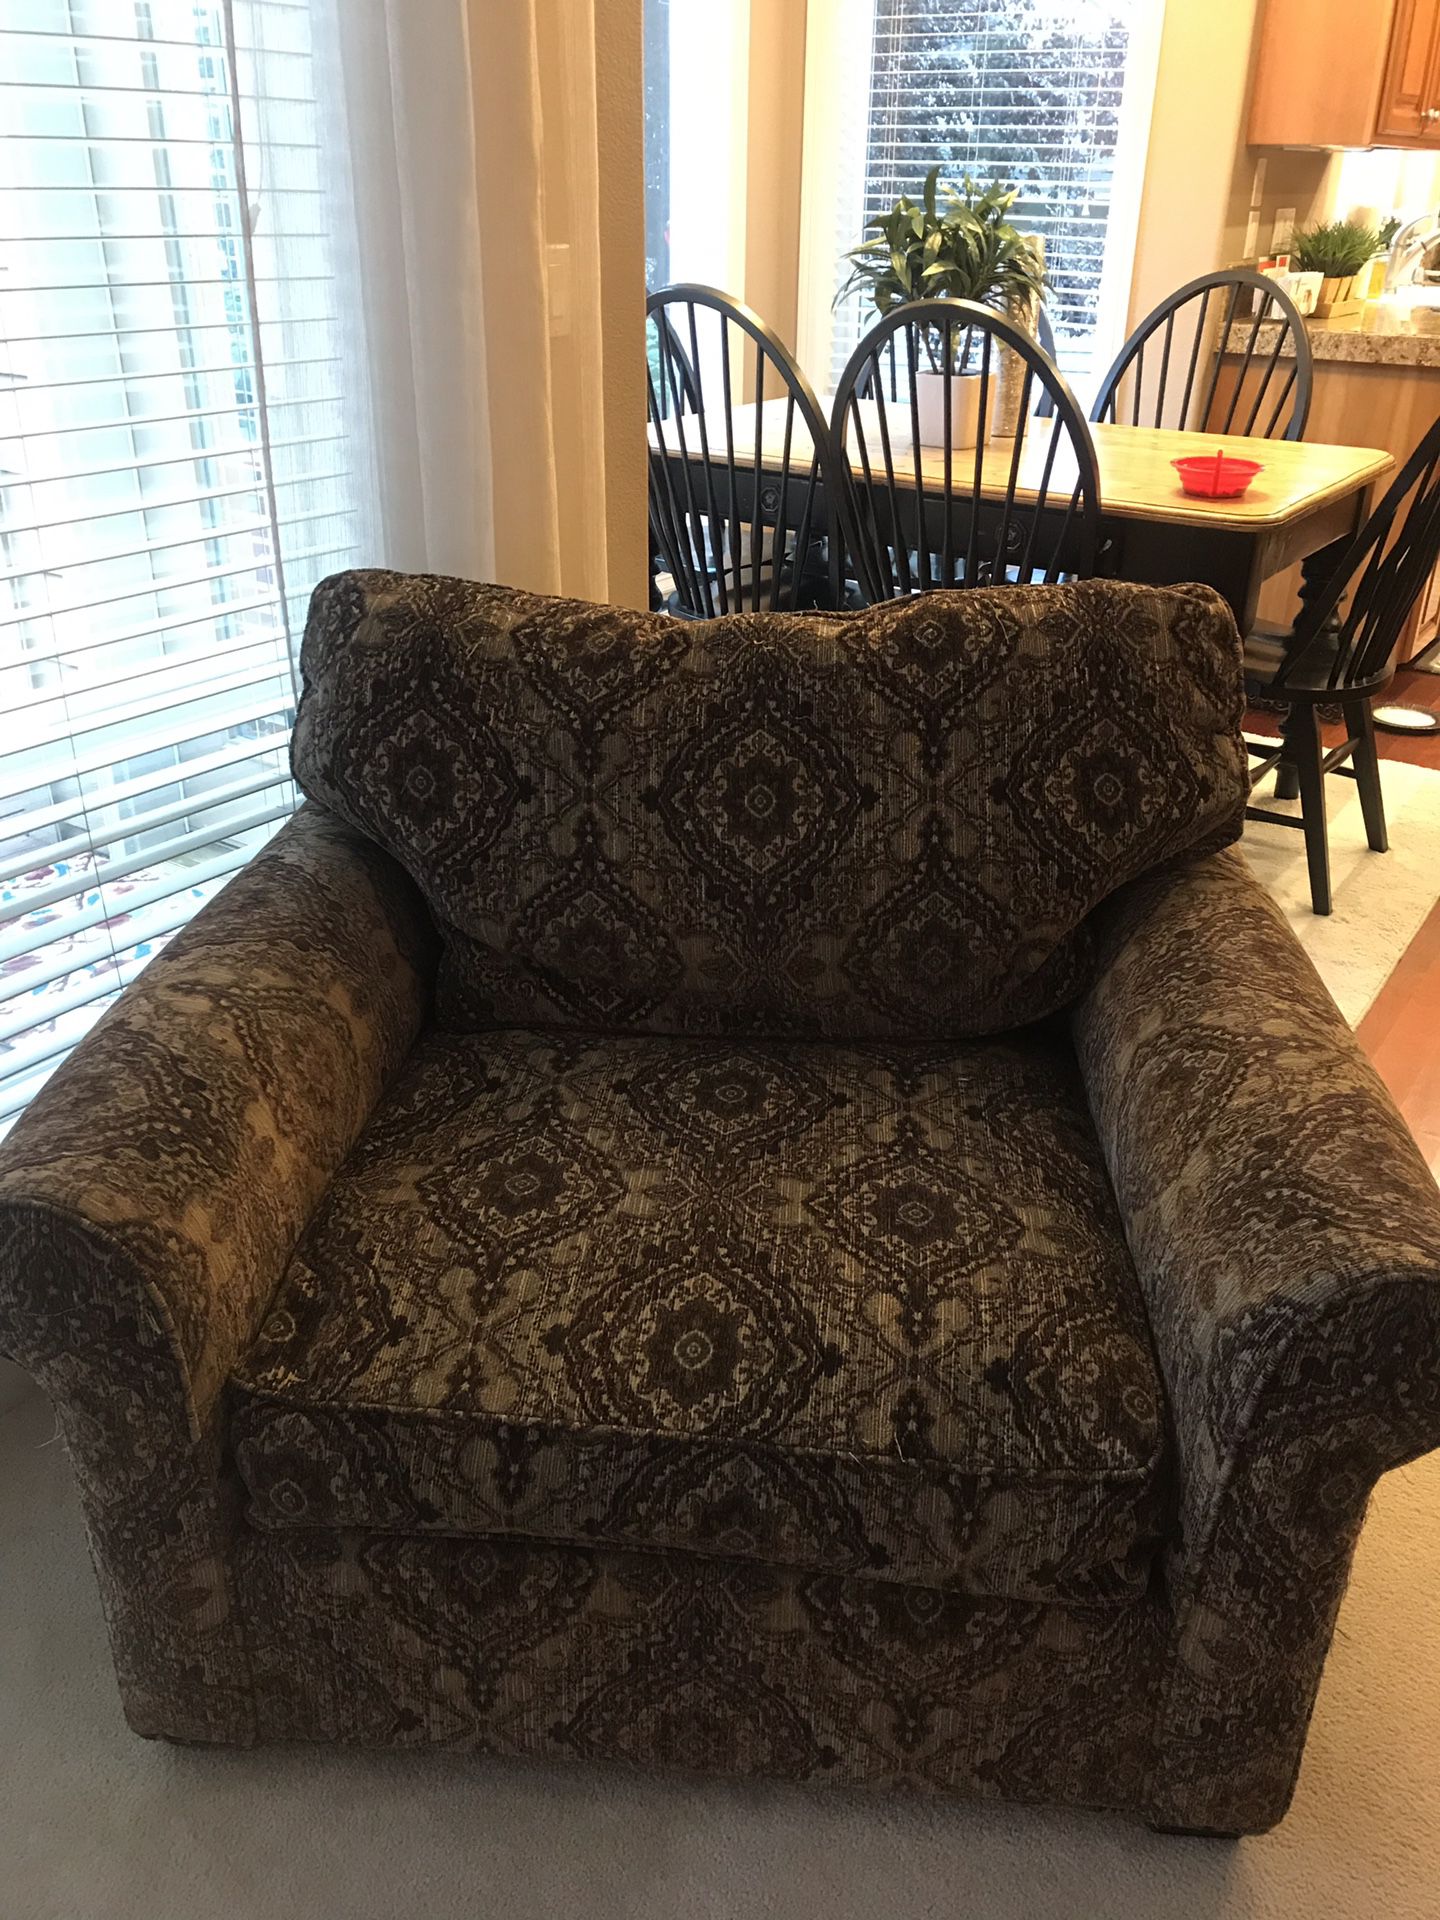 Oversized chair